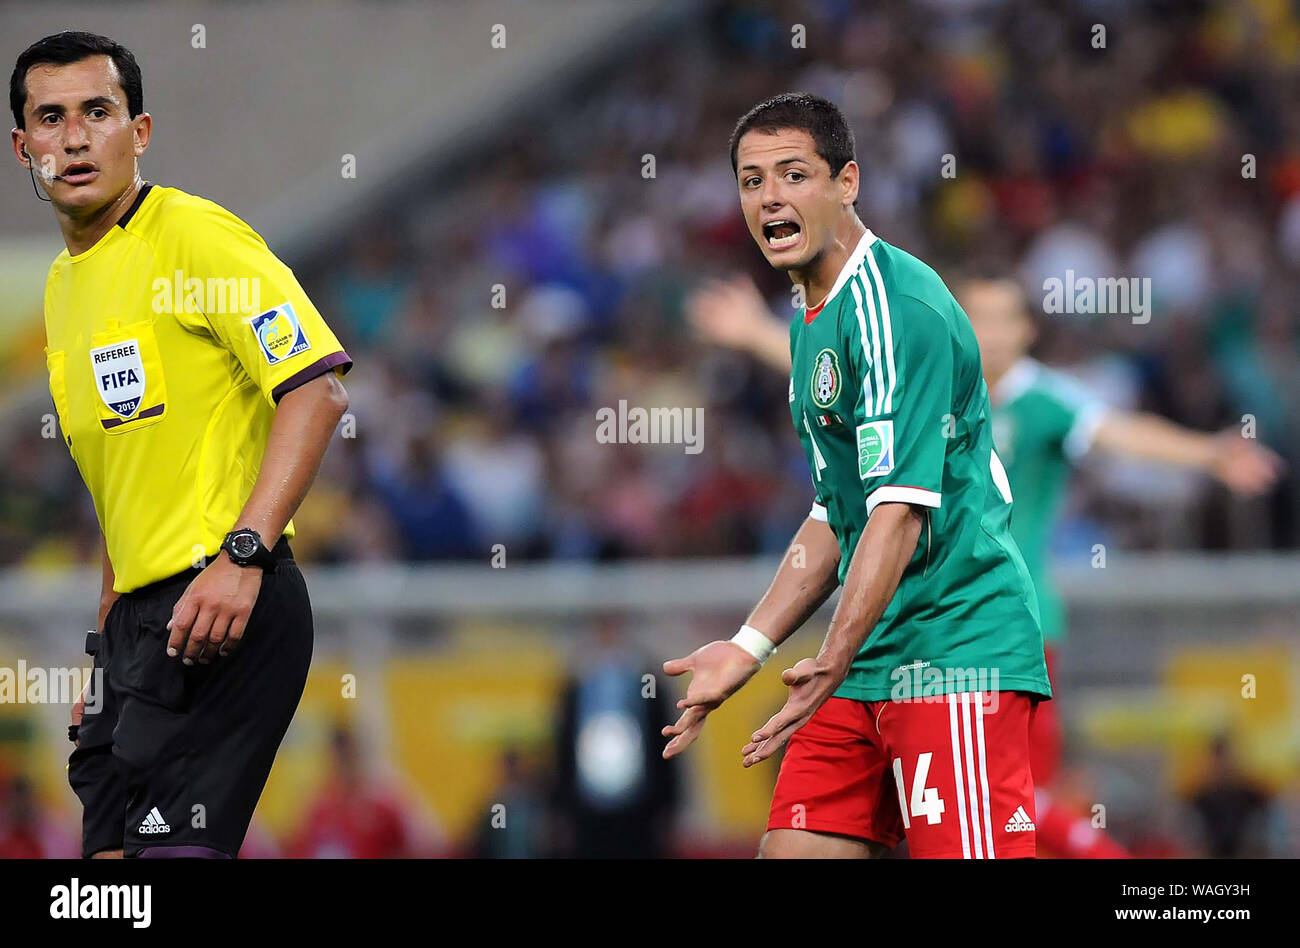 Rio de Janeiro, Brazil, June 16, 2013. Mexico national team player Javier Hernandez, Chicharito complains with the referee during the Mexico-Italy mat Stock Photo